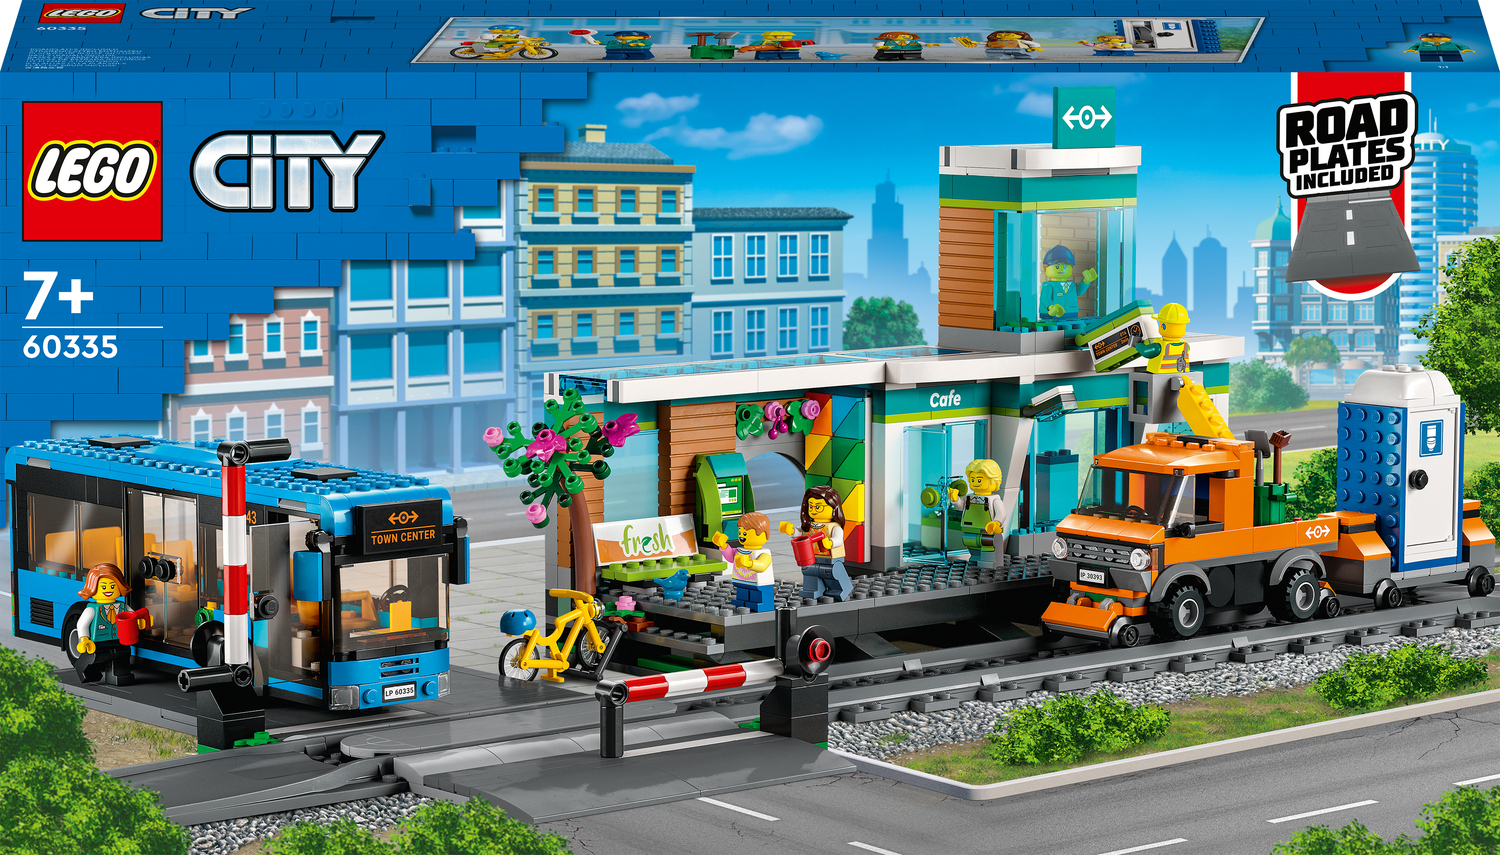 LEGO City Train Station Building with Bus - Toys To Love